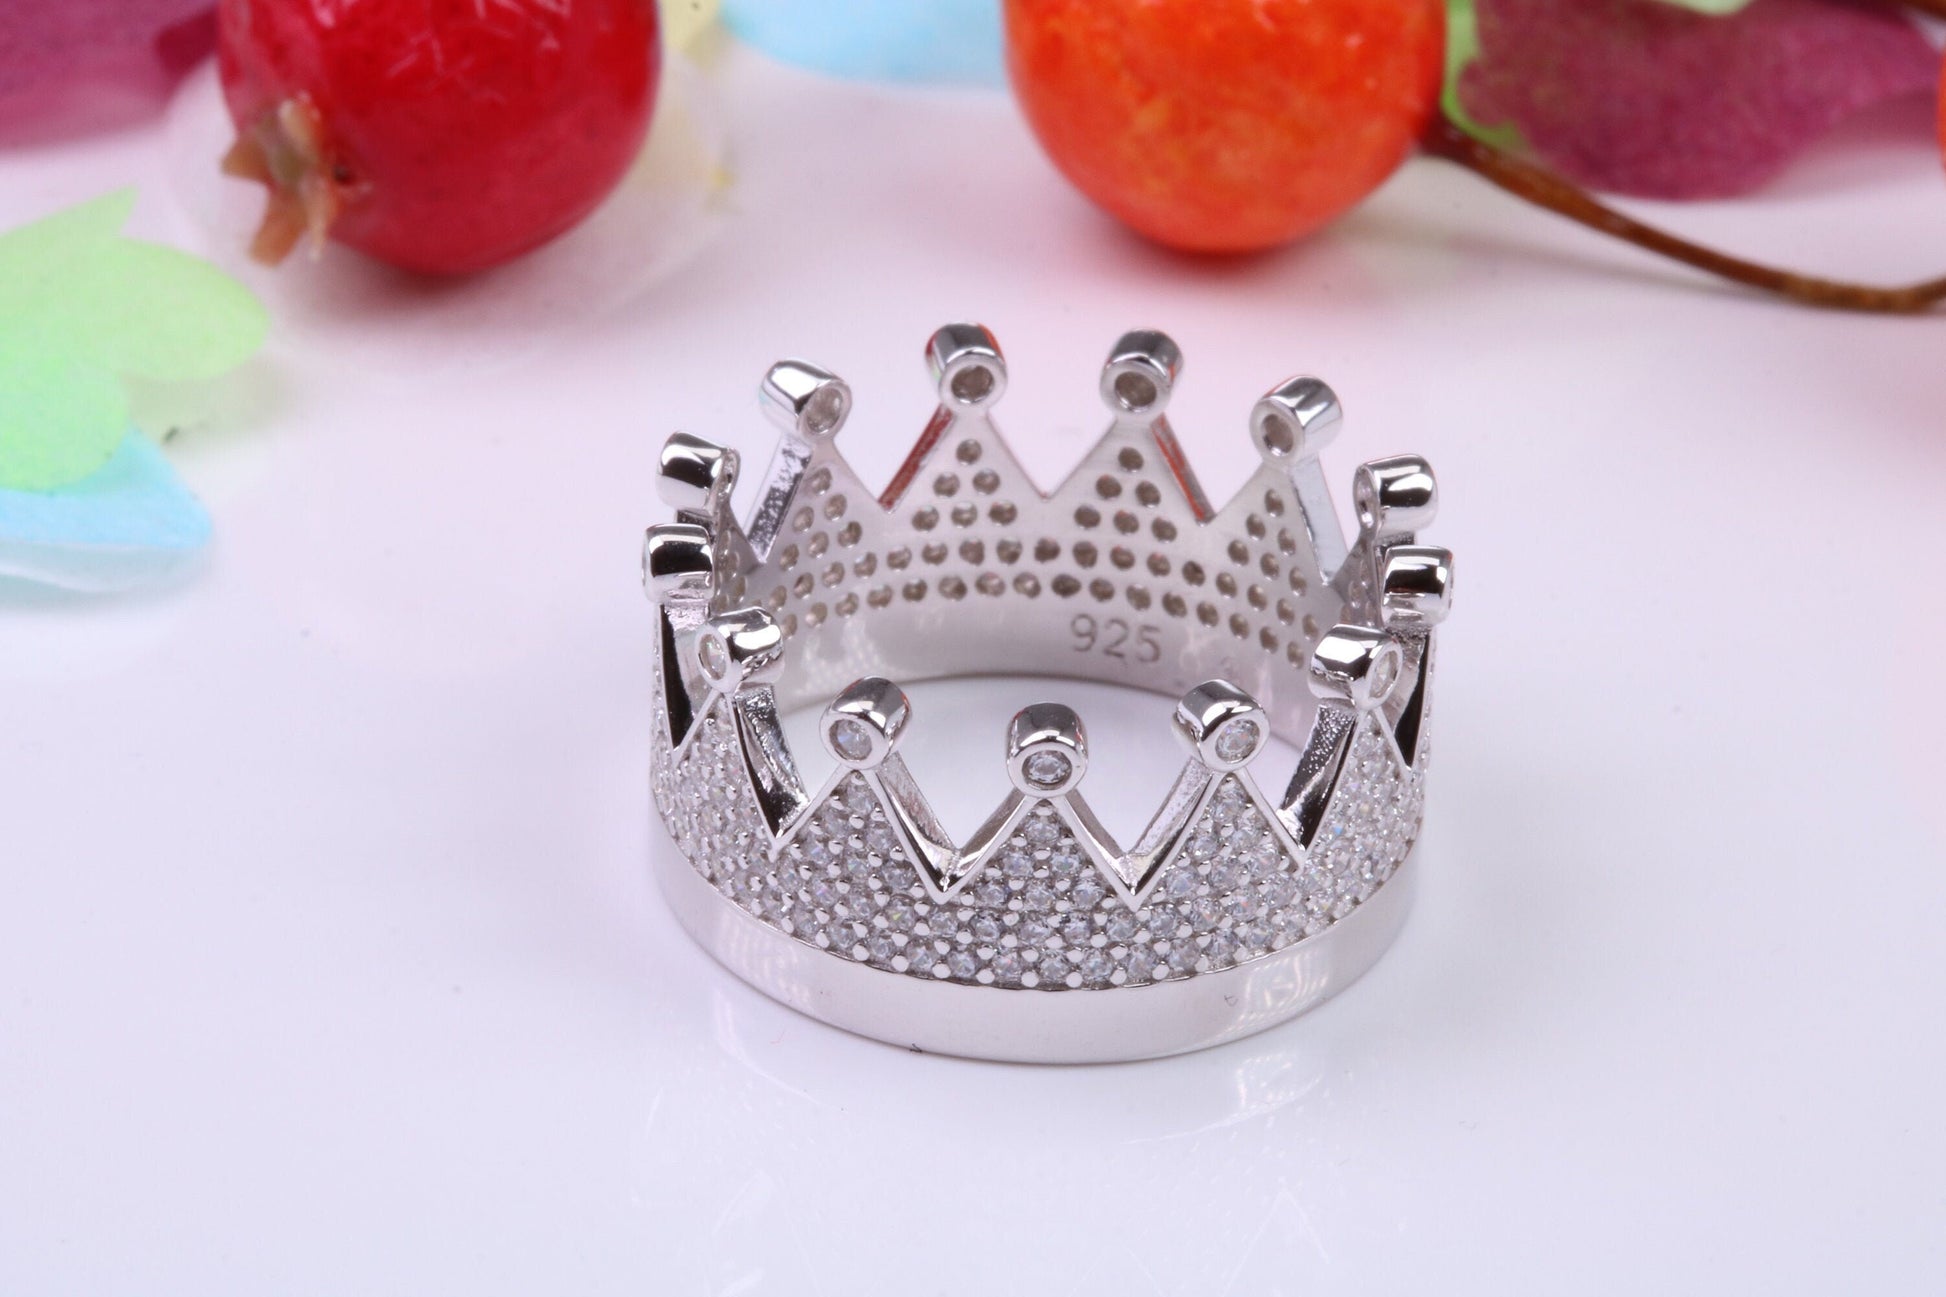 Crown Ring, Very Dressy 11 mm wide Cubic Zirconia set Ring, Made from solid Silver